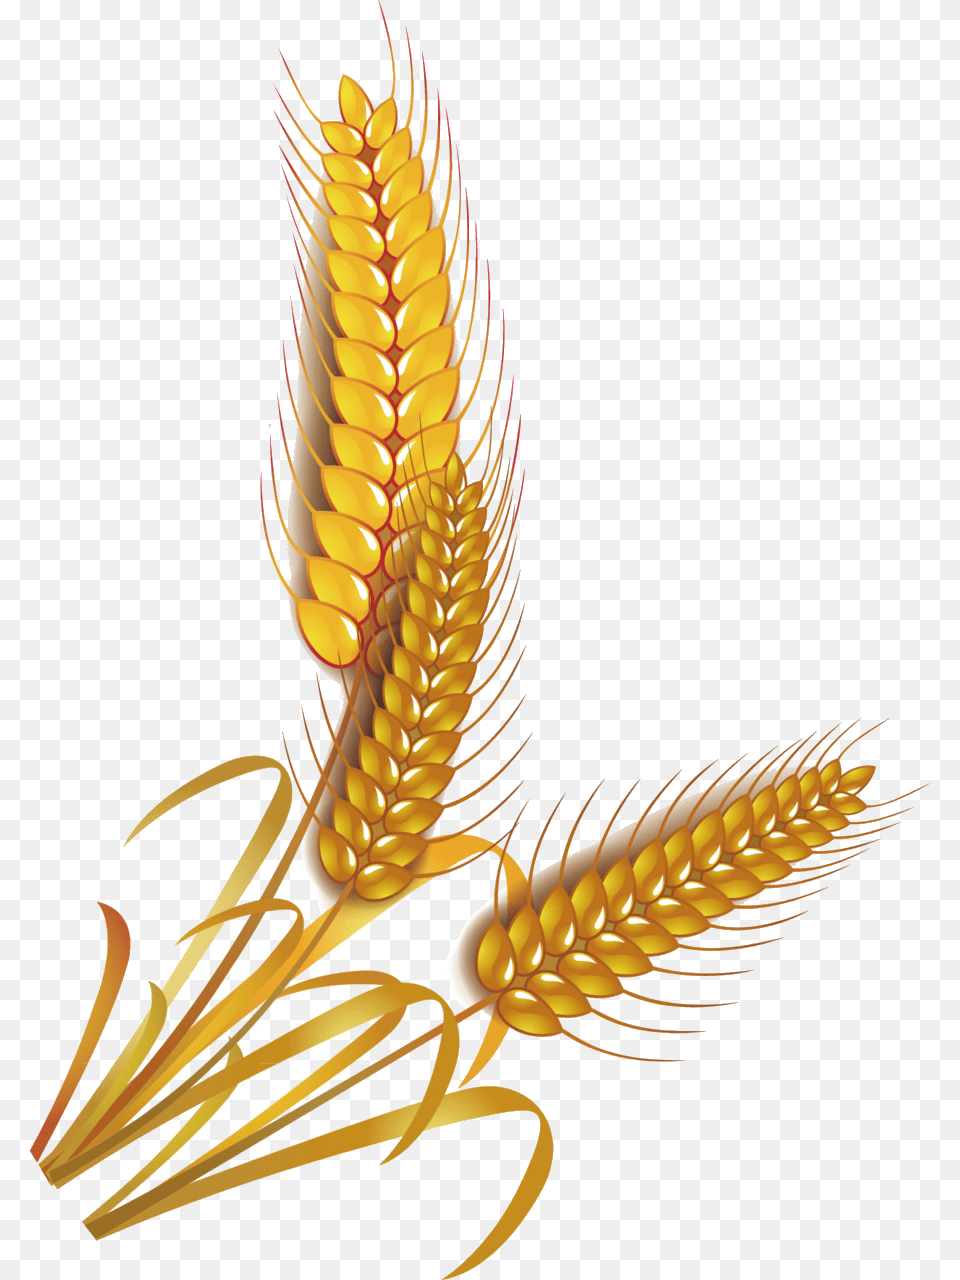 Wheat Vector At For Personal Use Transparent Whole Grain Clip Art, Food, Produce, Chandelier, Lamp Free Png Download